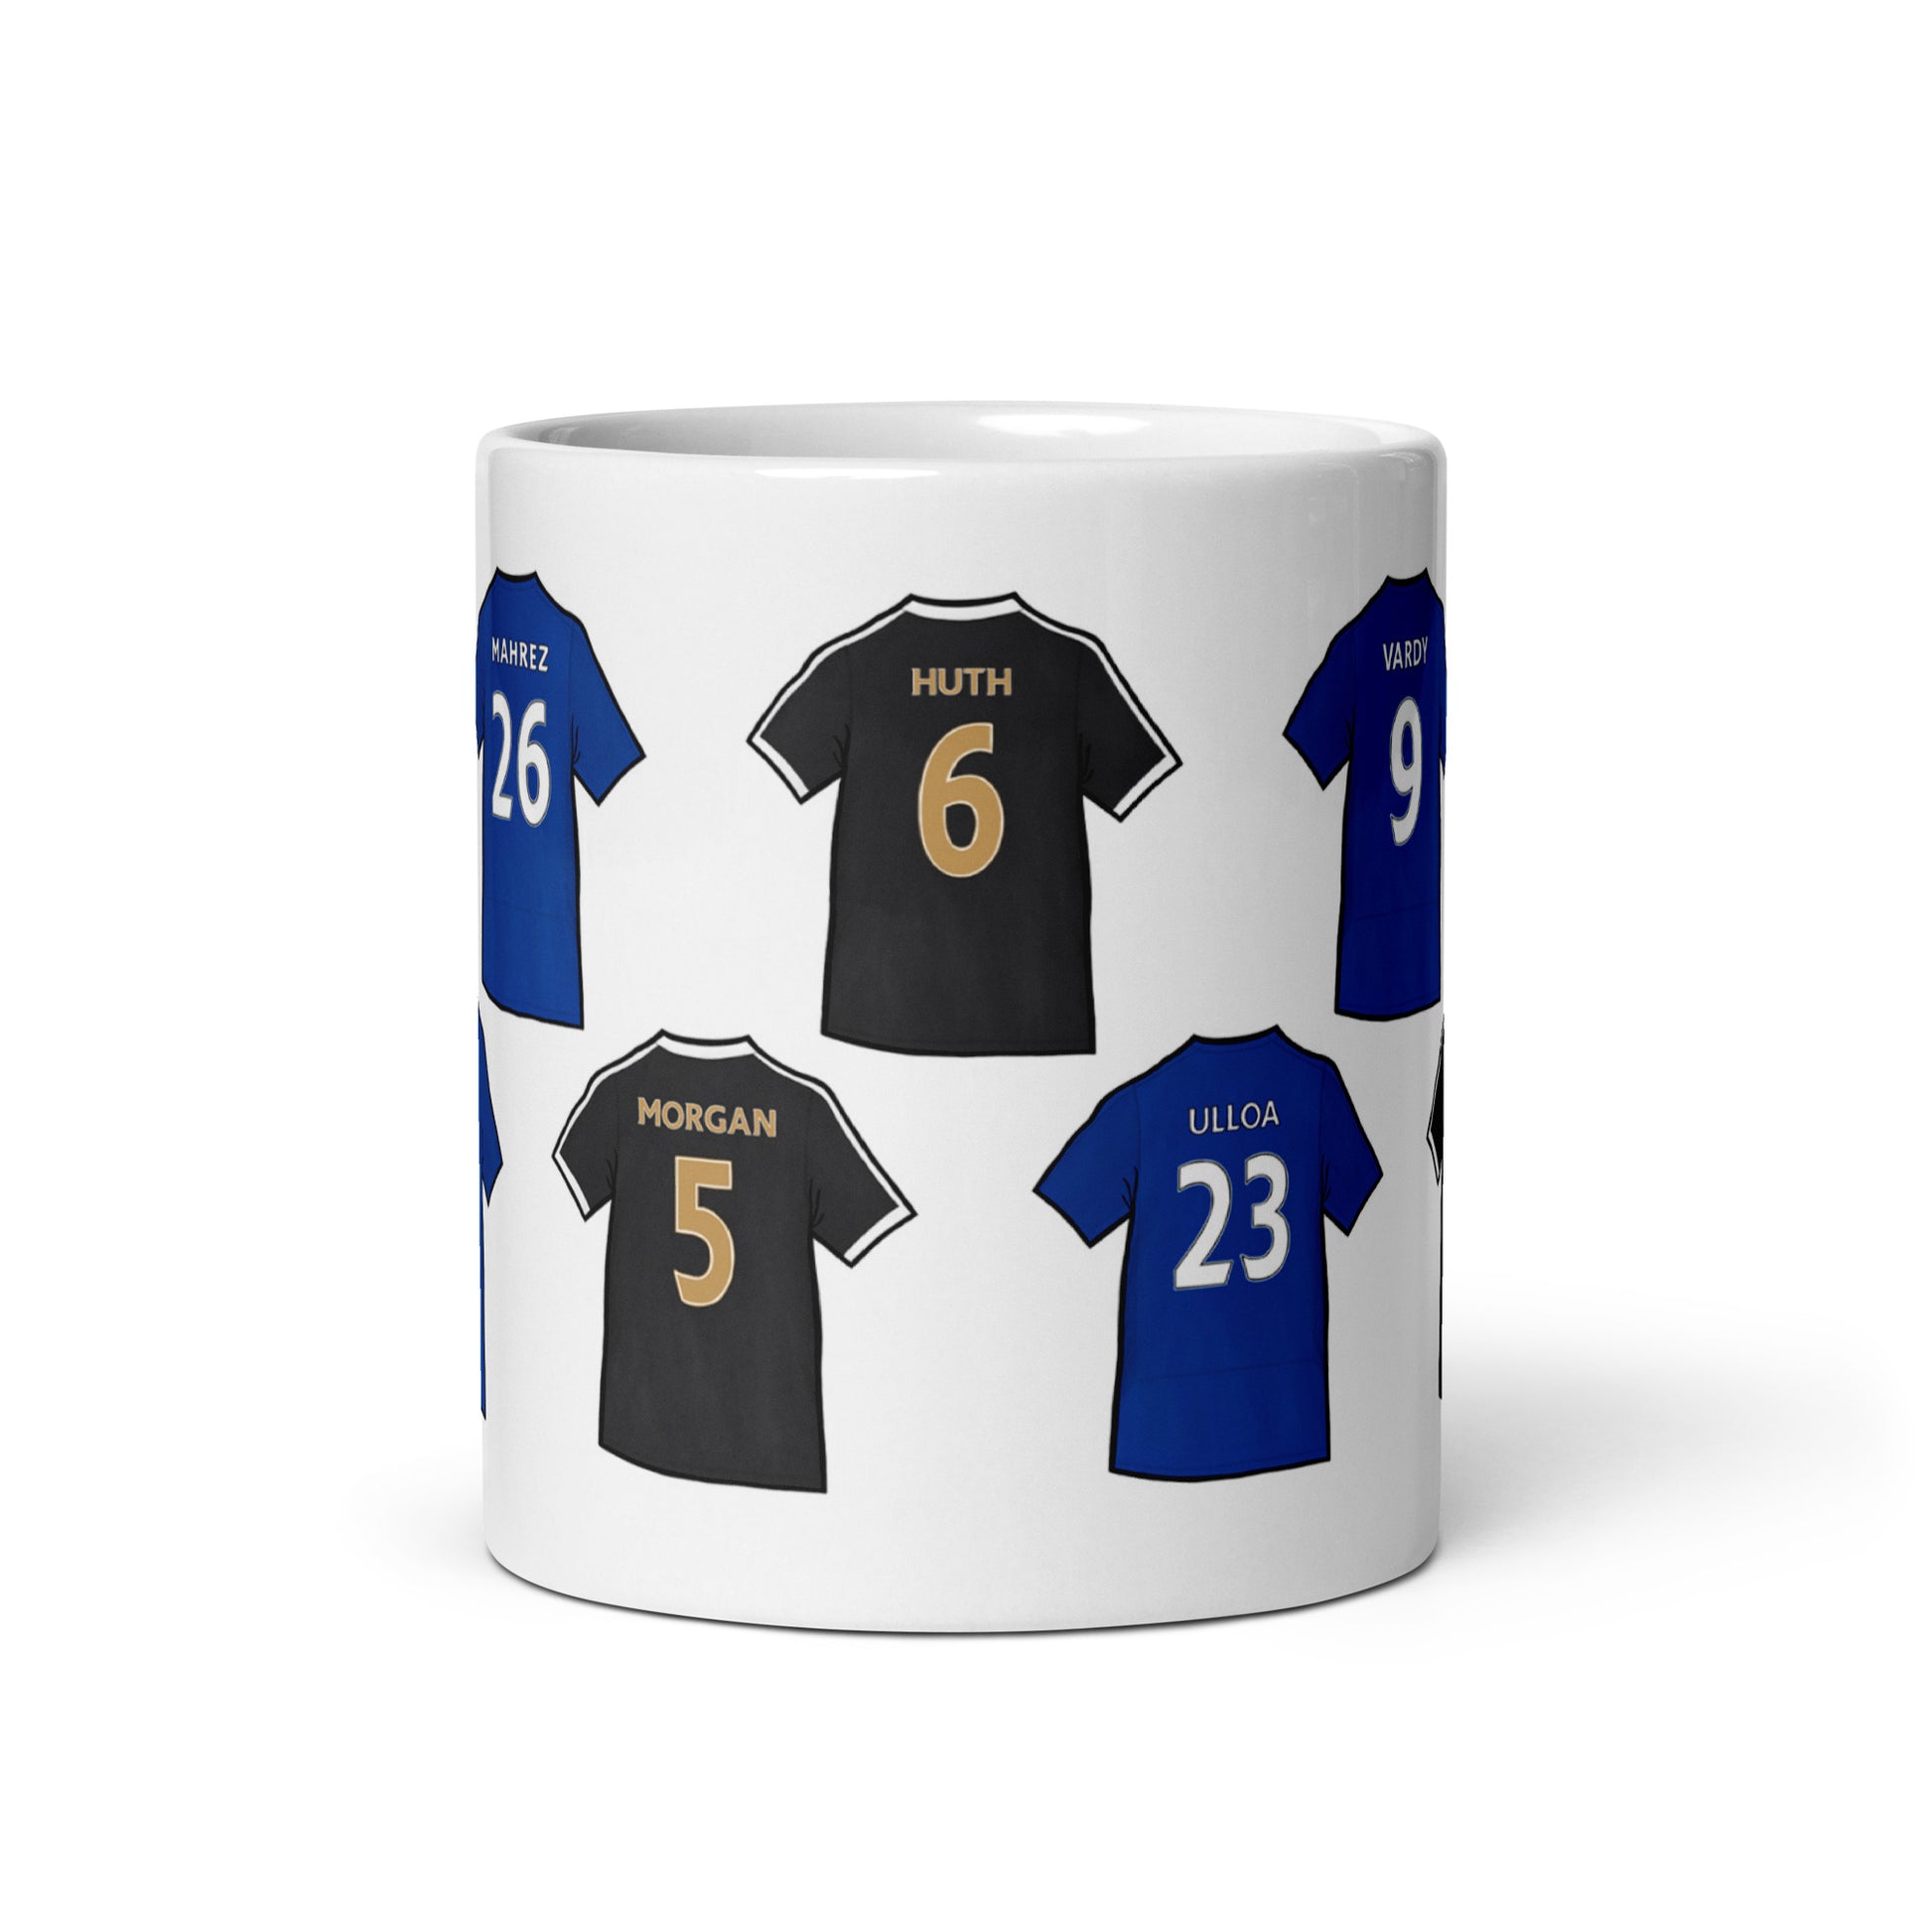 Leicester City football themed mug celebrating the 2015/16 title